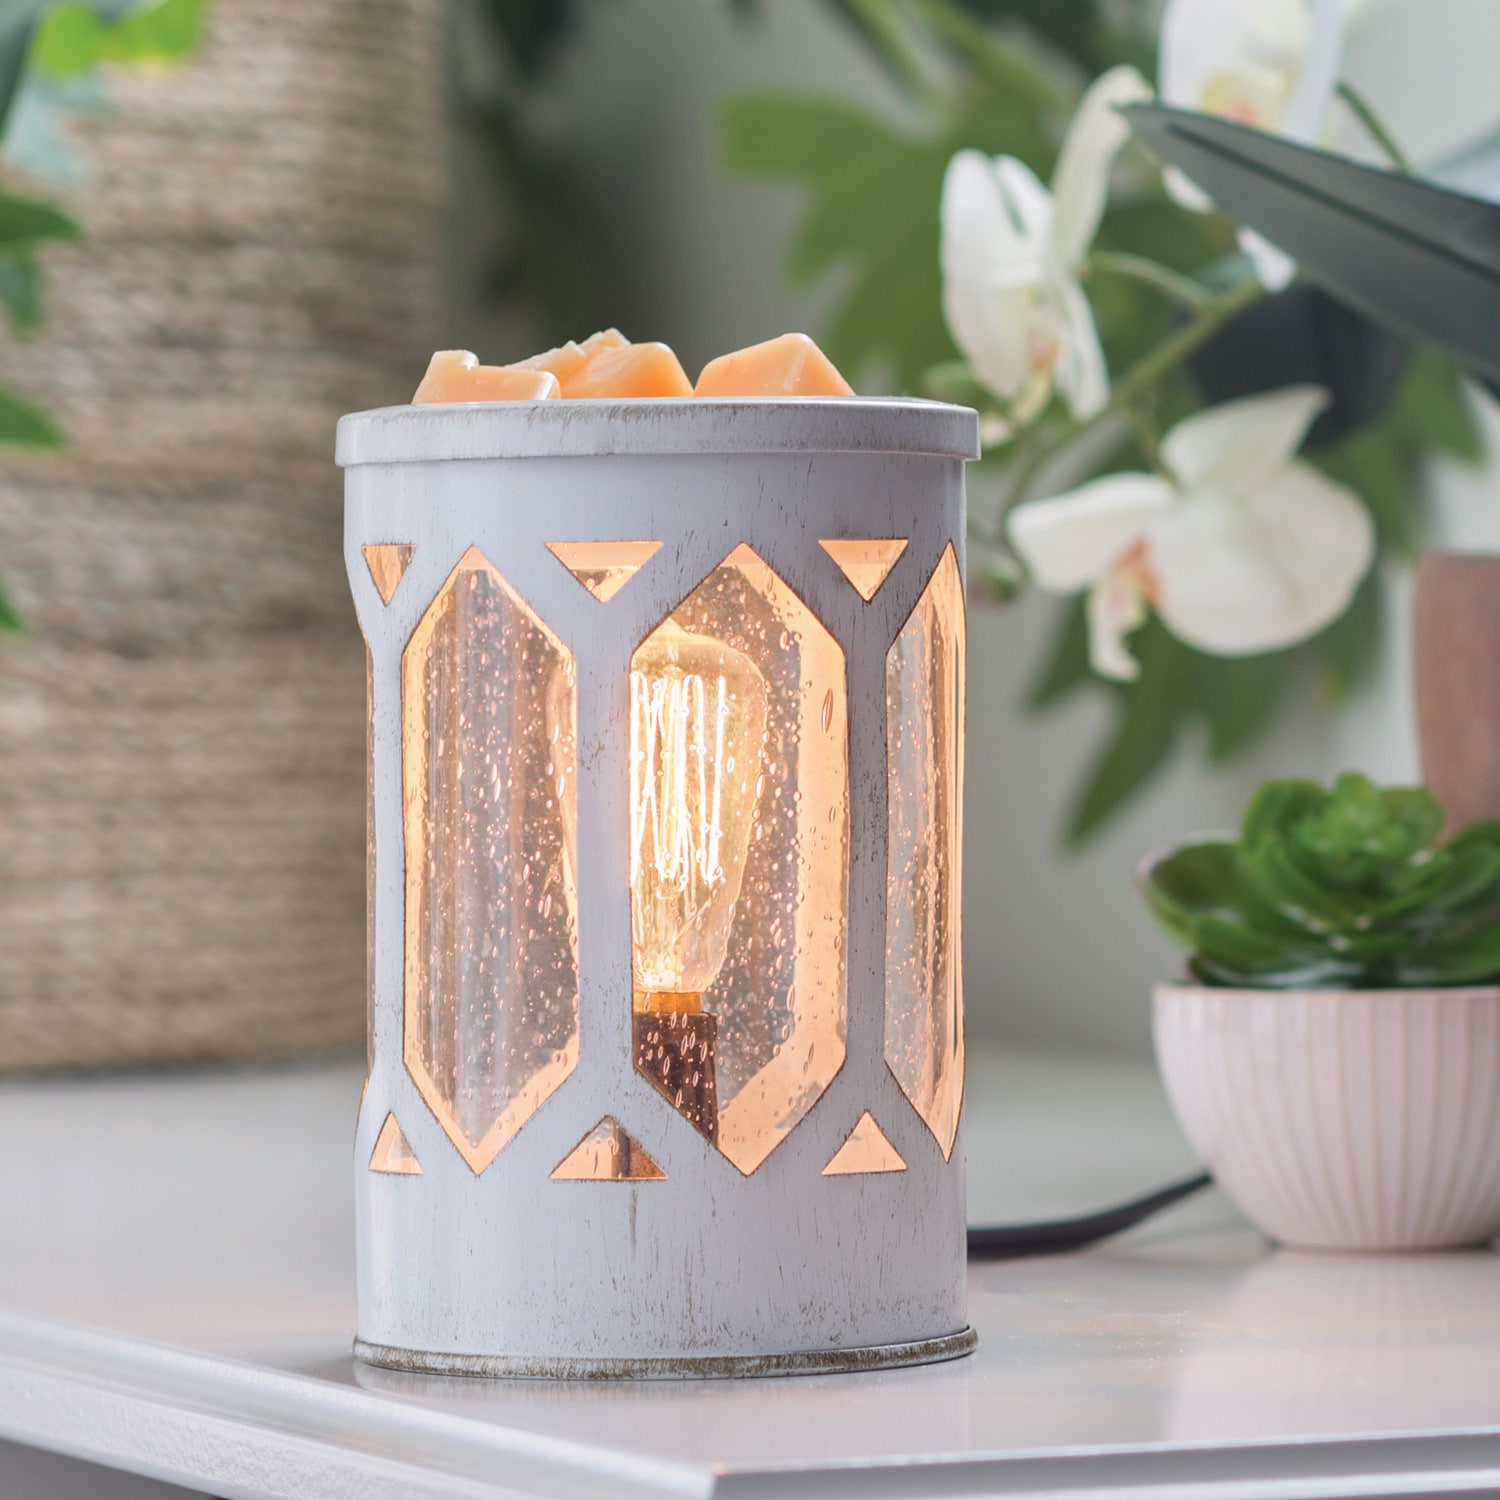 Candle Warmers Signature Lighted Candle Warmer